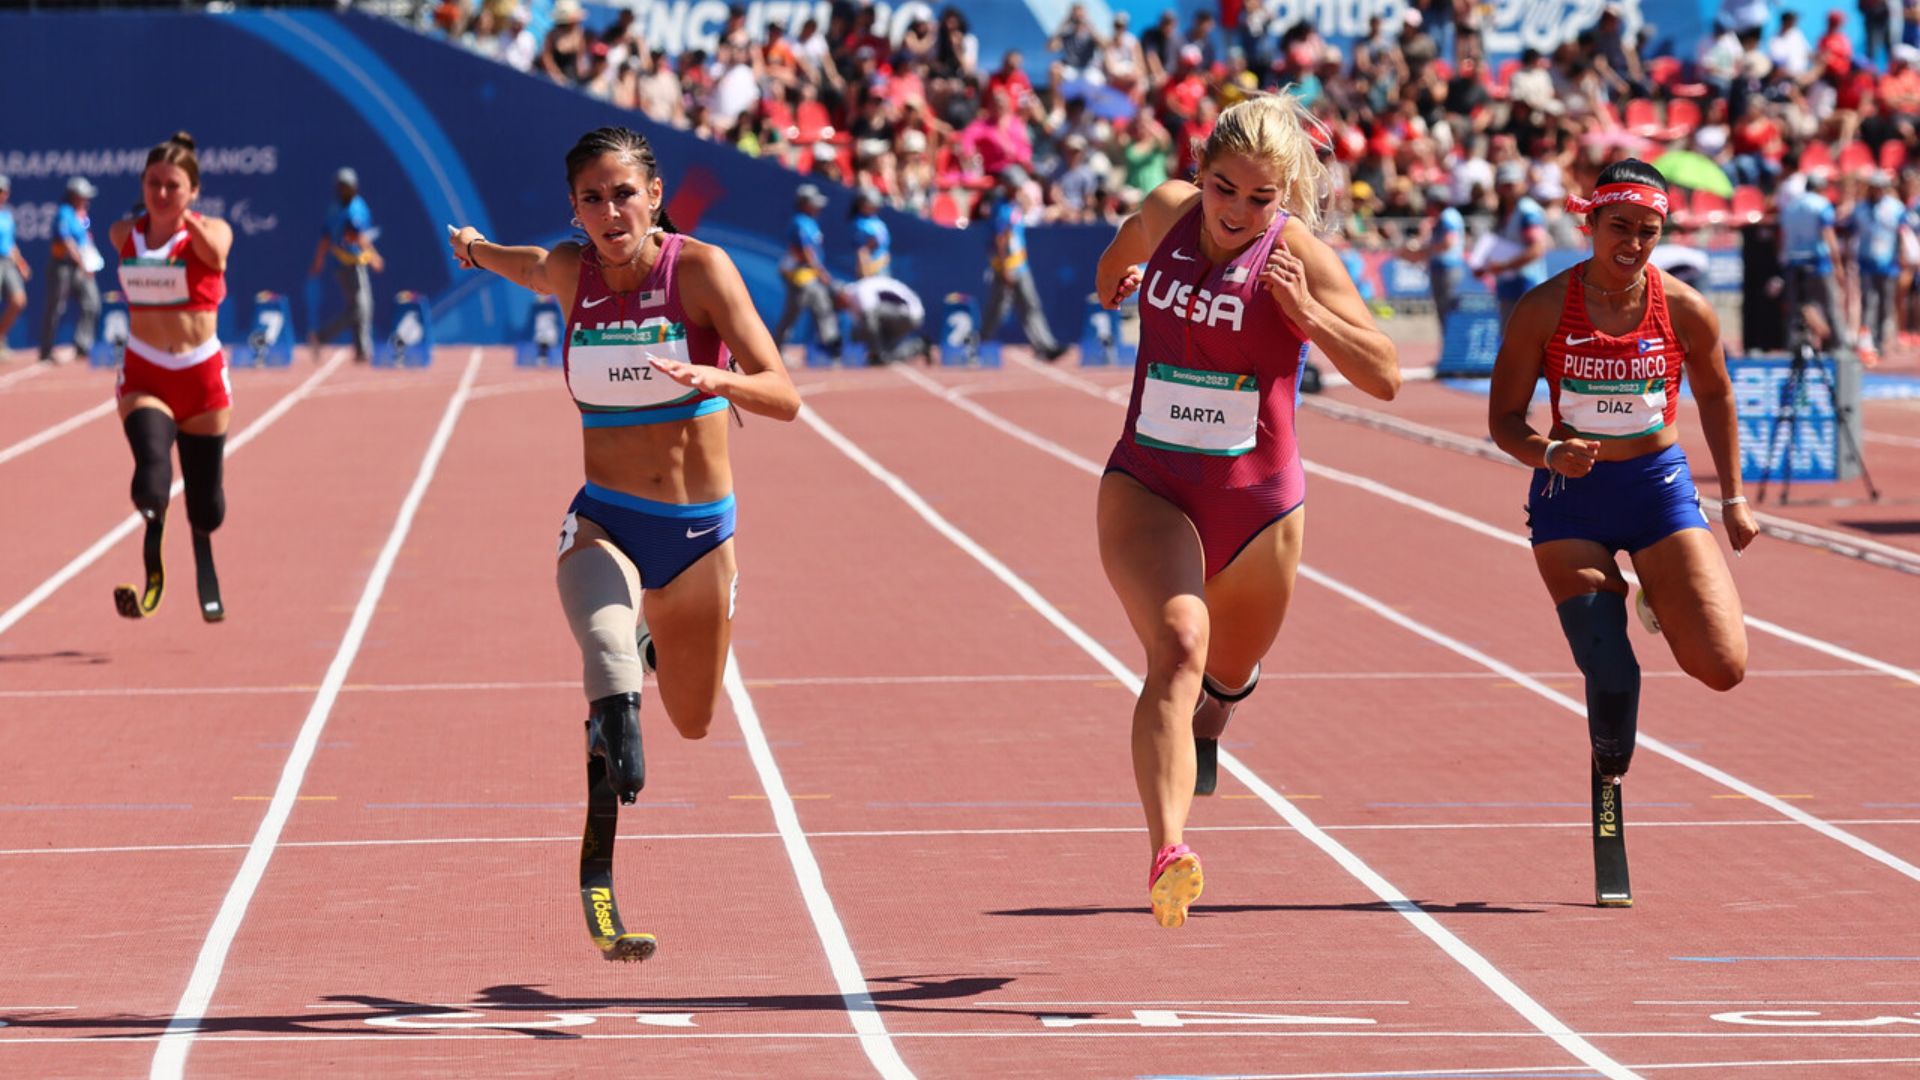 The United States Takes the “One-Two-Three” in Female's 100m T64